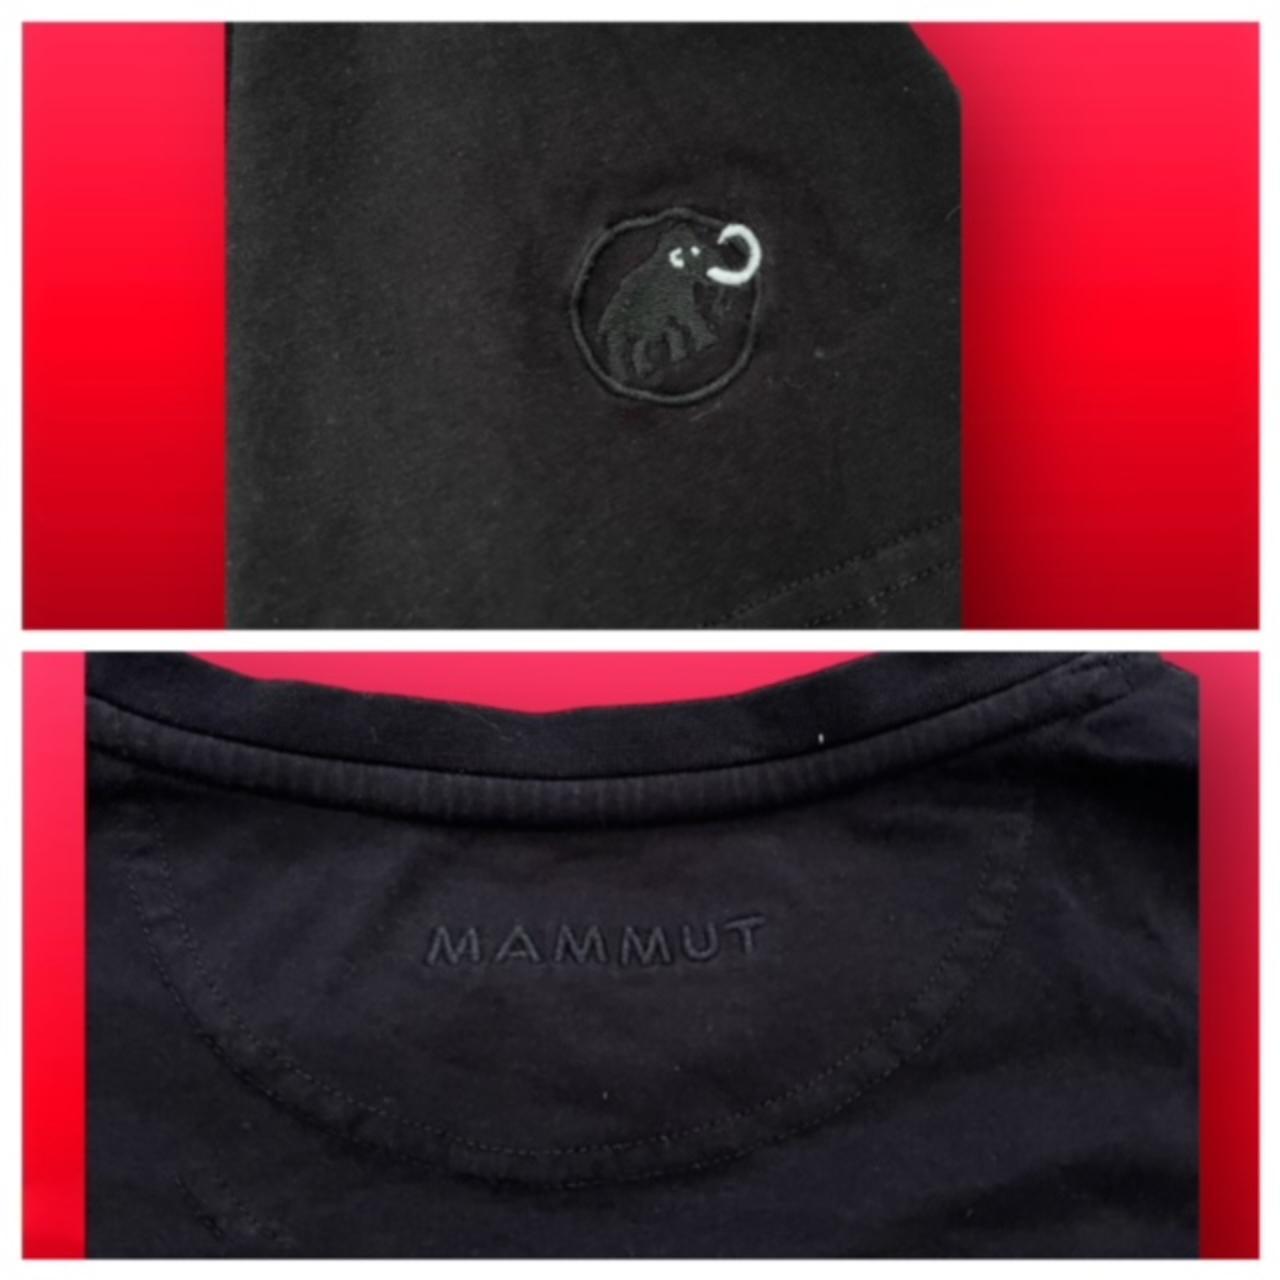 Mammut Men's Black and Red T-shirt (3)